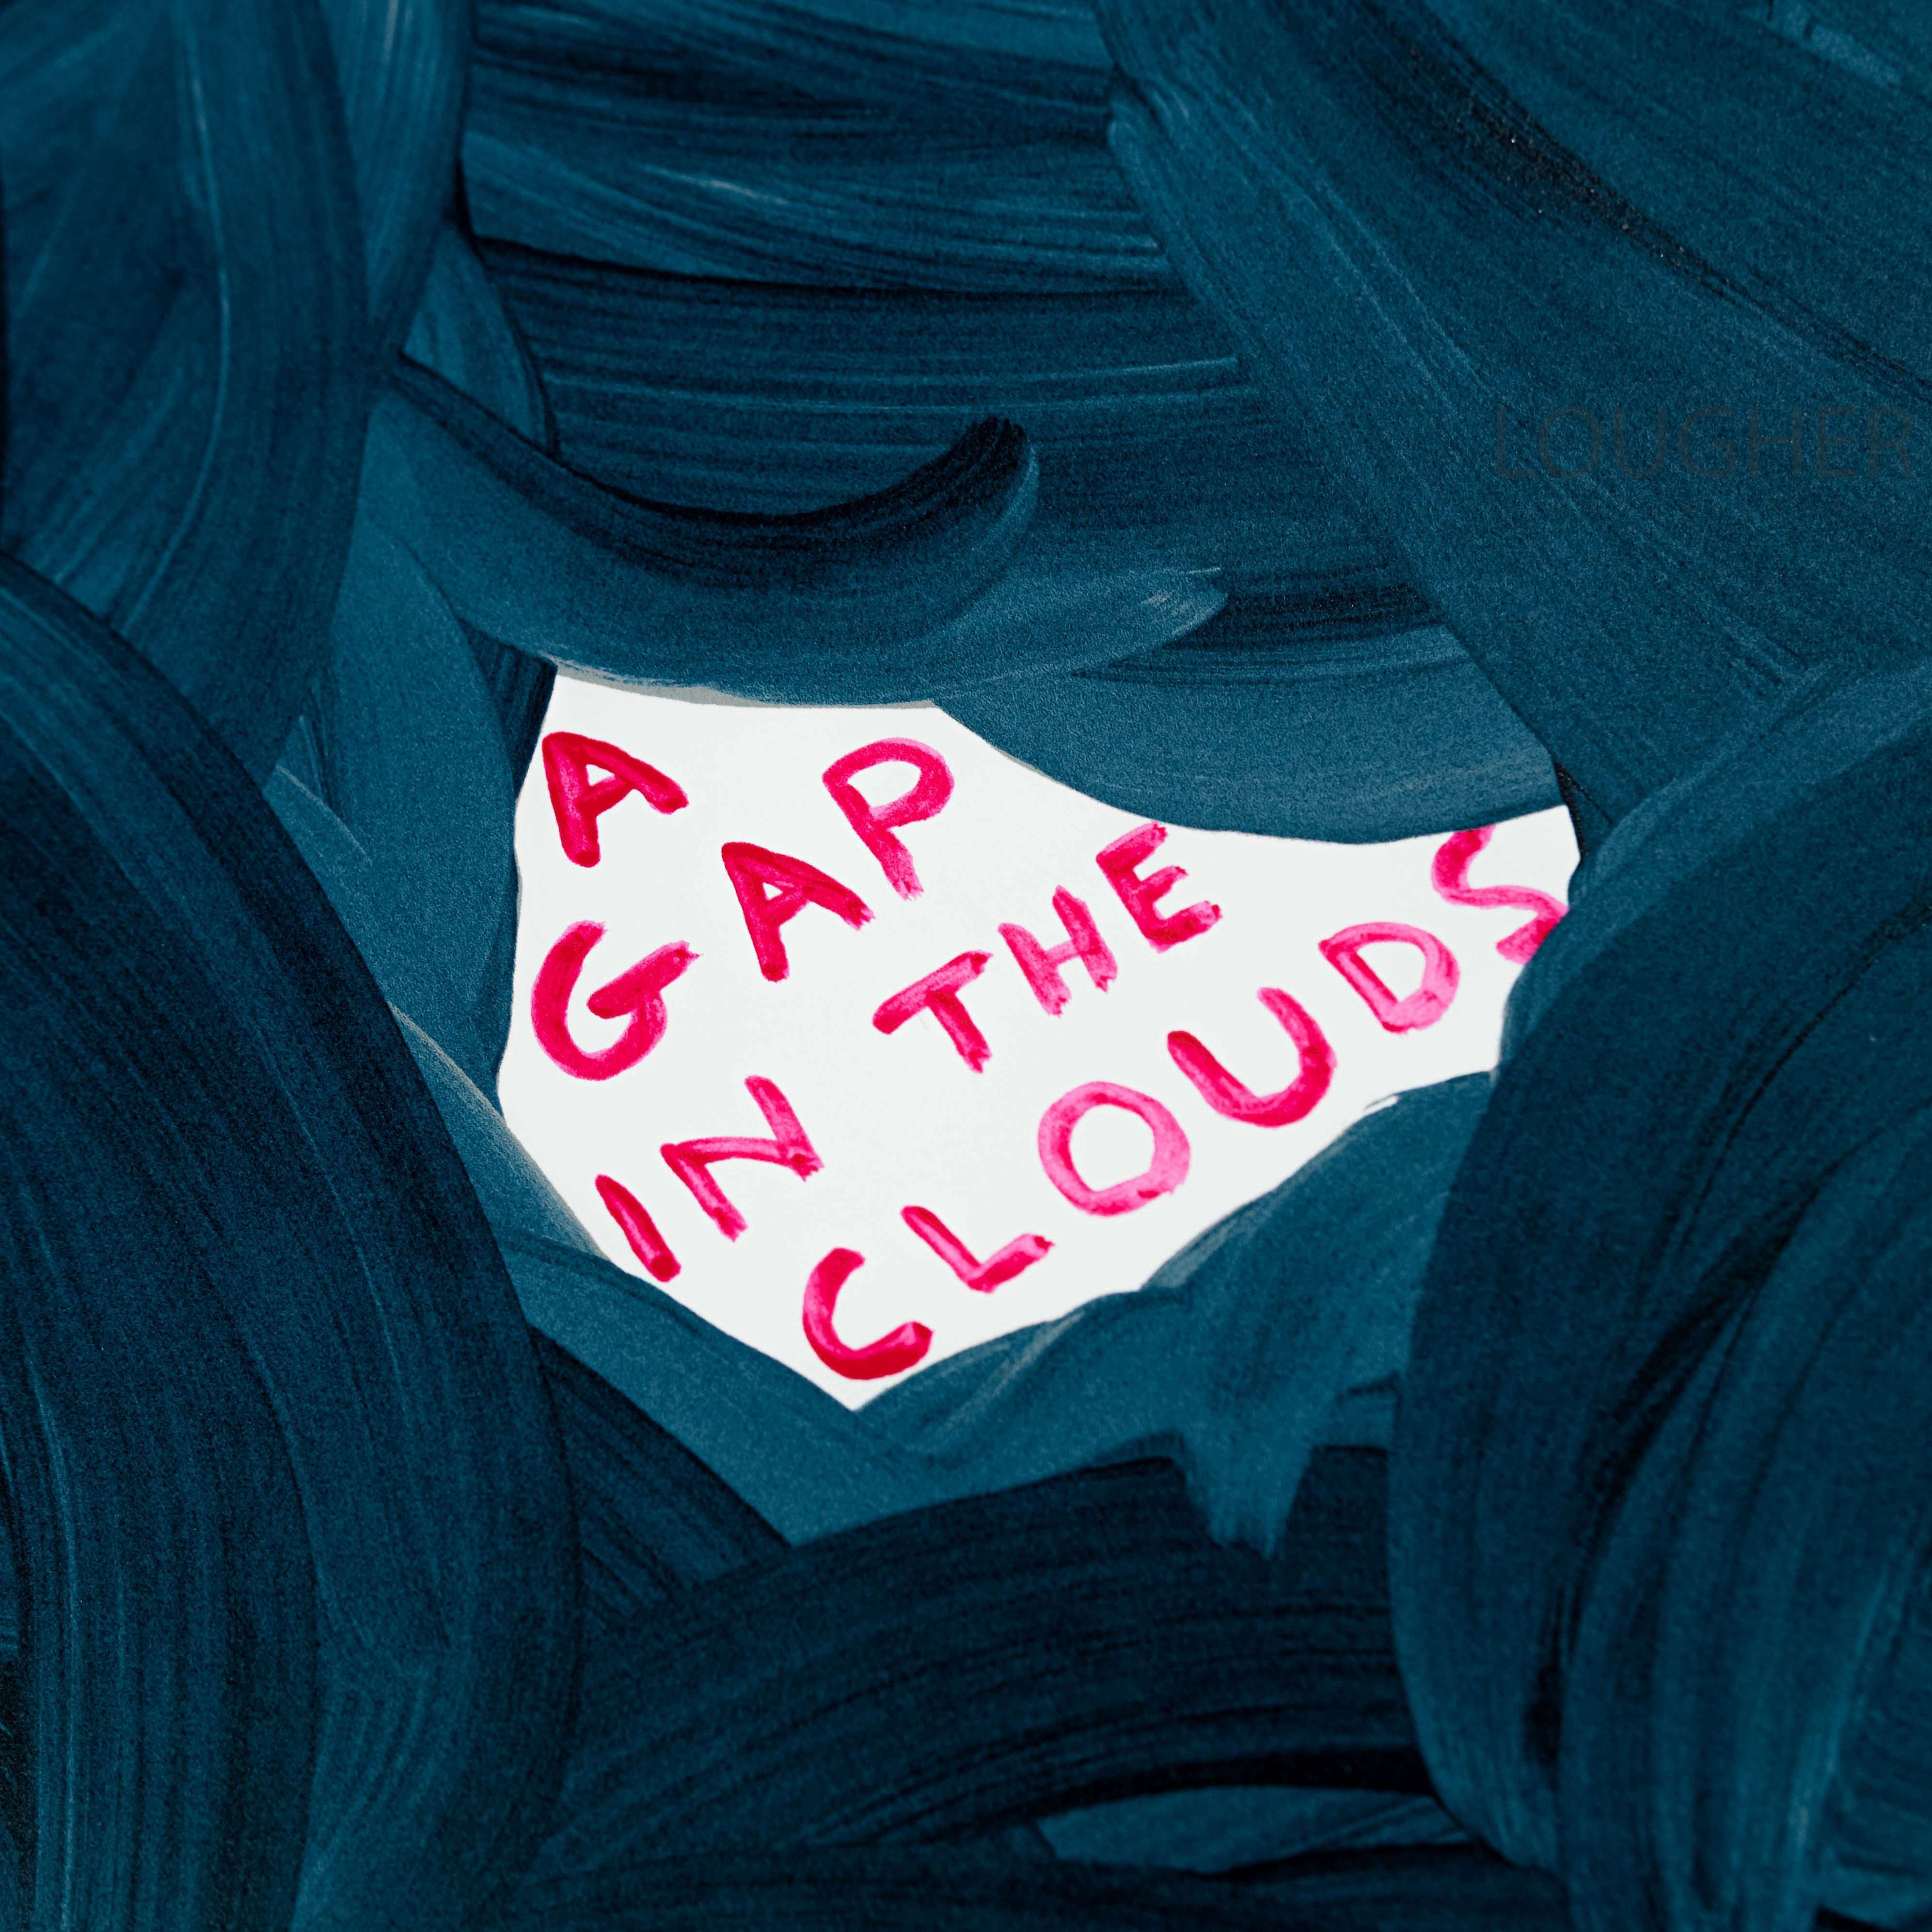 David Shrigley, A Gap in the Clouds, 2020 For Sale - Lougher Contemporary